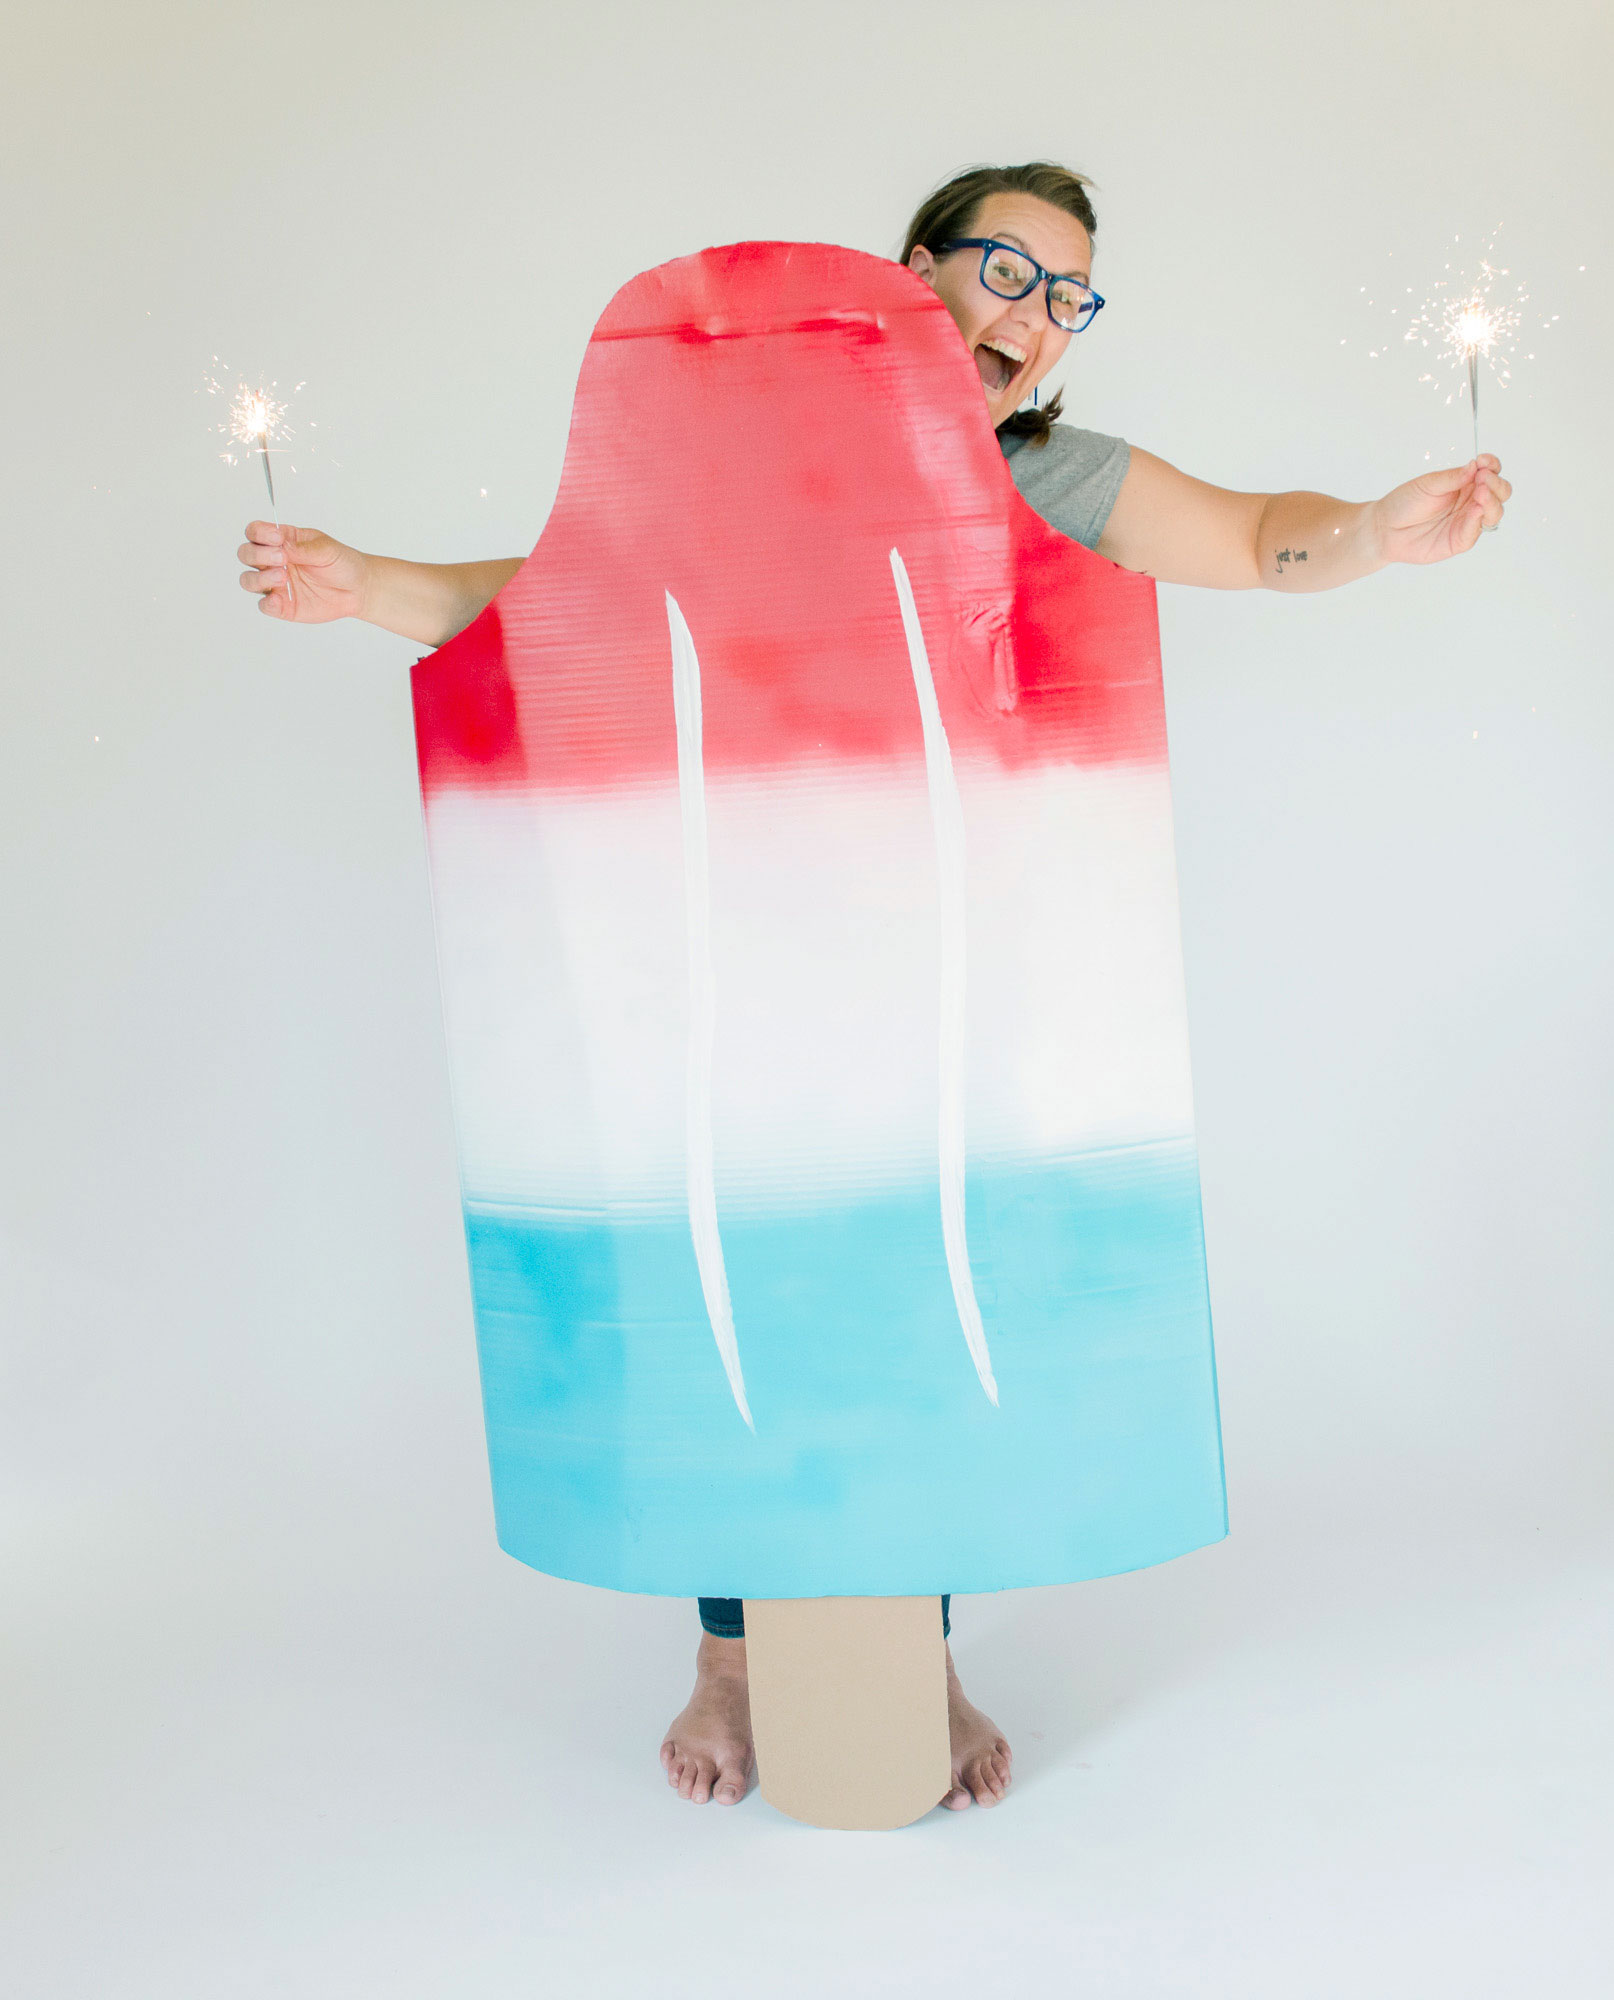 How to make an easy bomb pop popsicle costume!